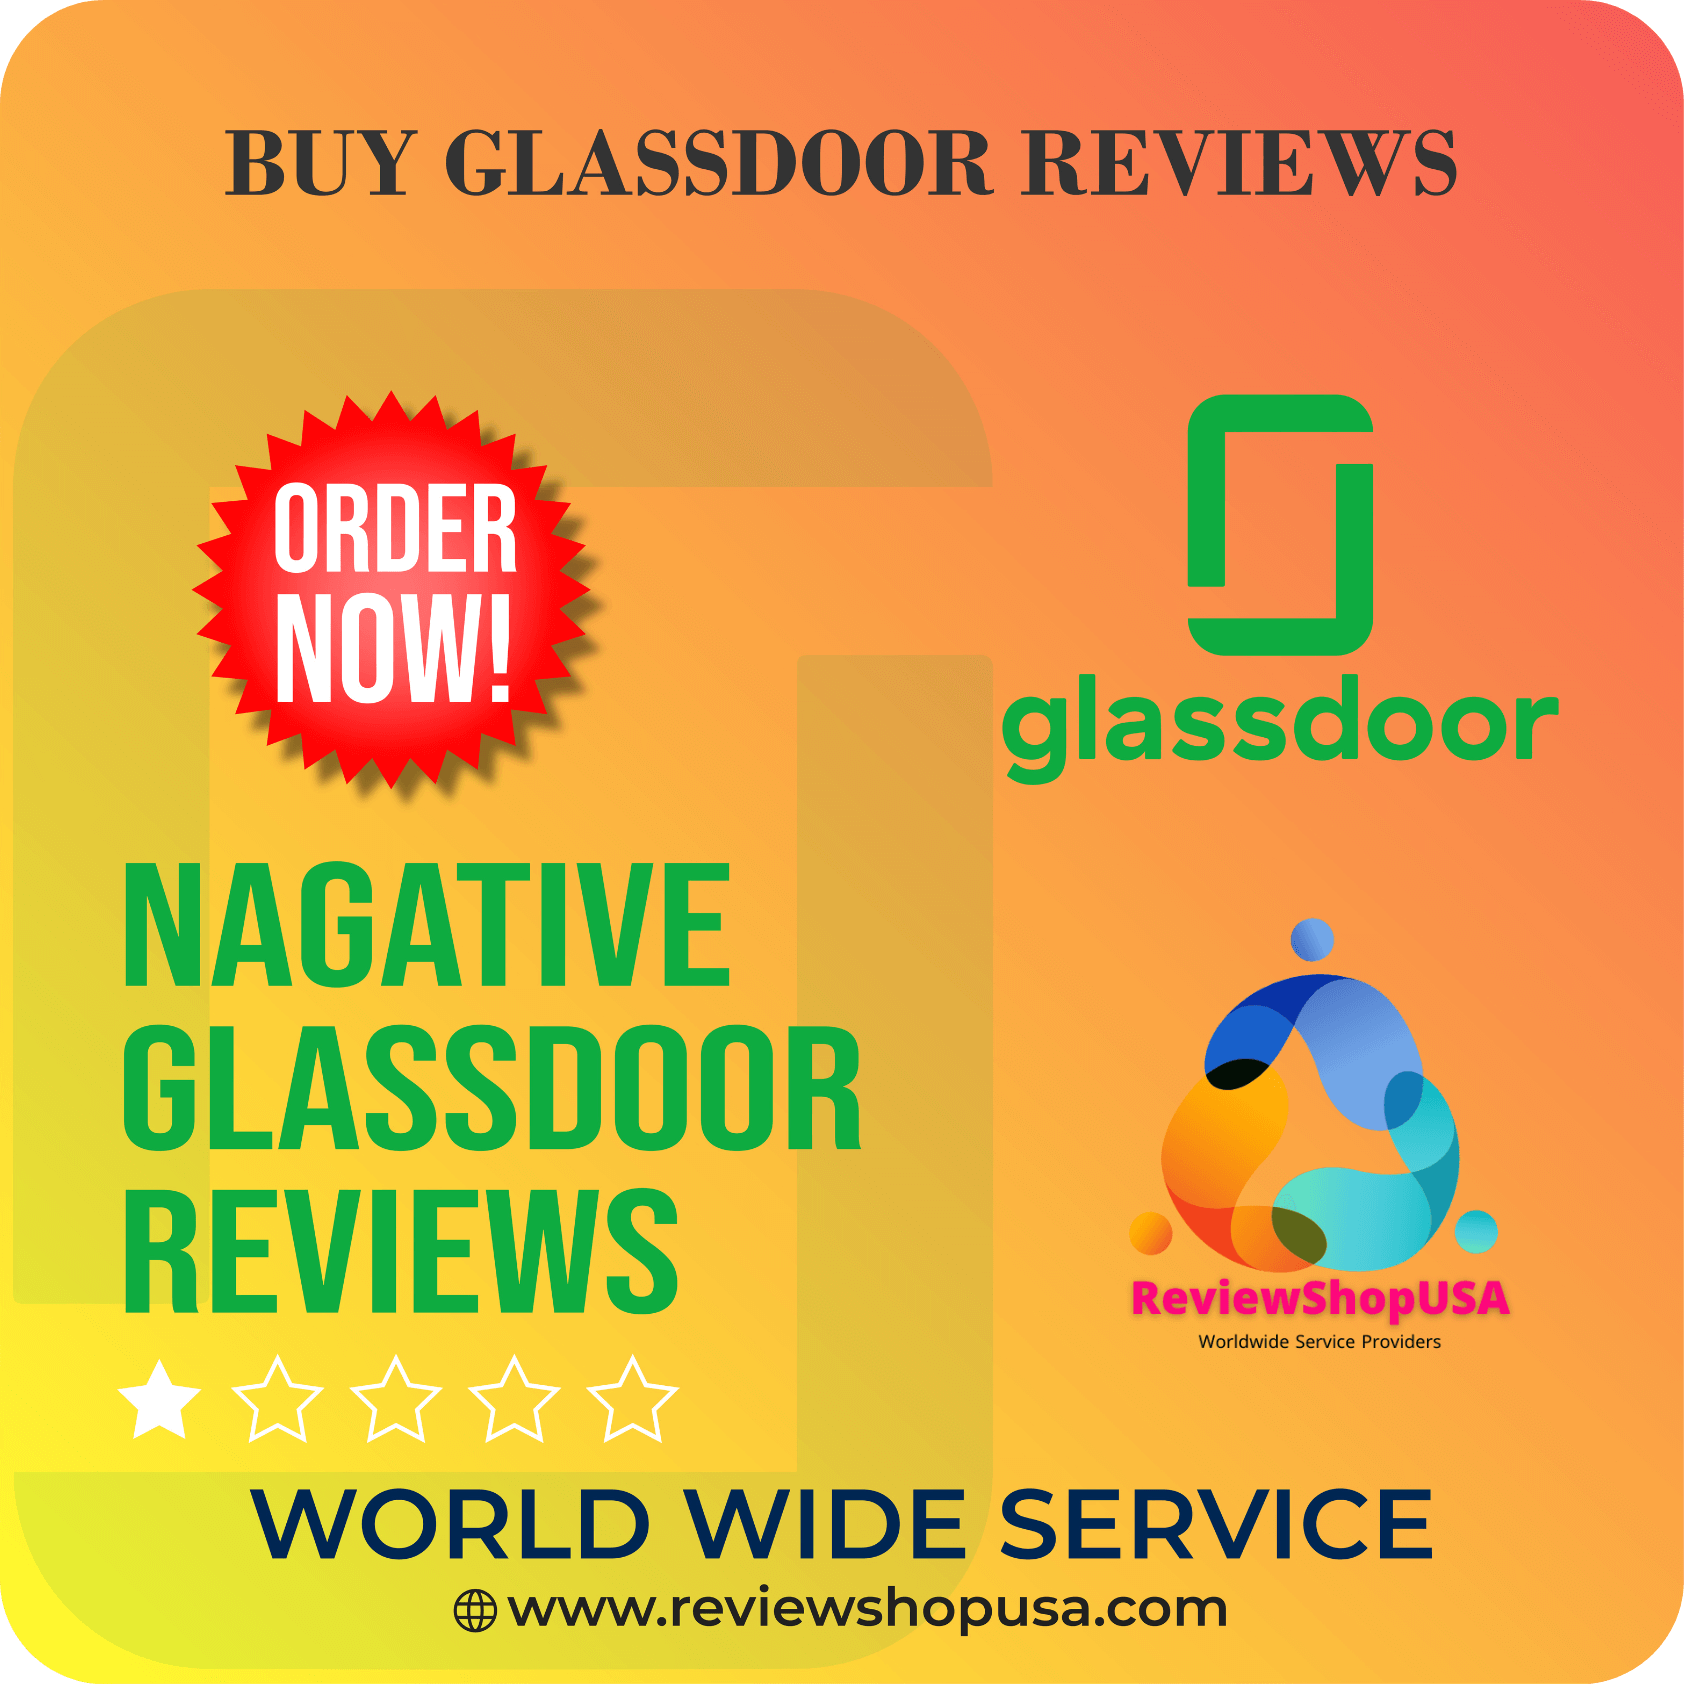 Buy Negative Glassdoor Reviews - Buy 1 star reviews for other business...